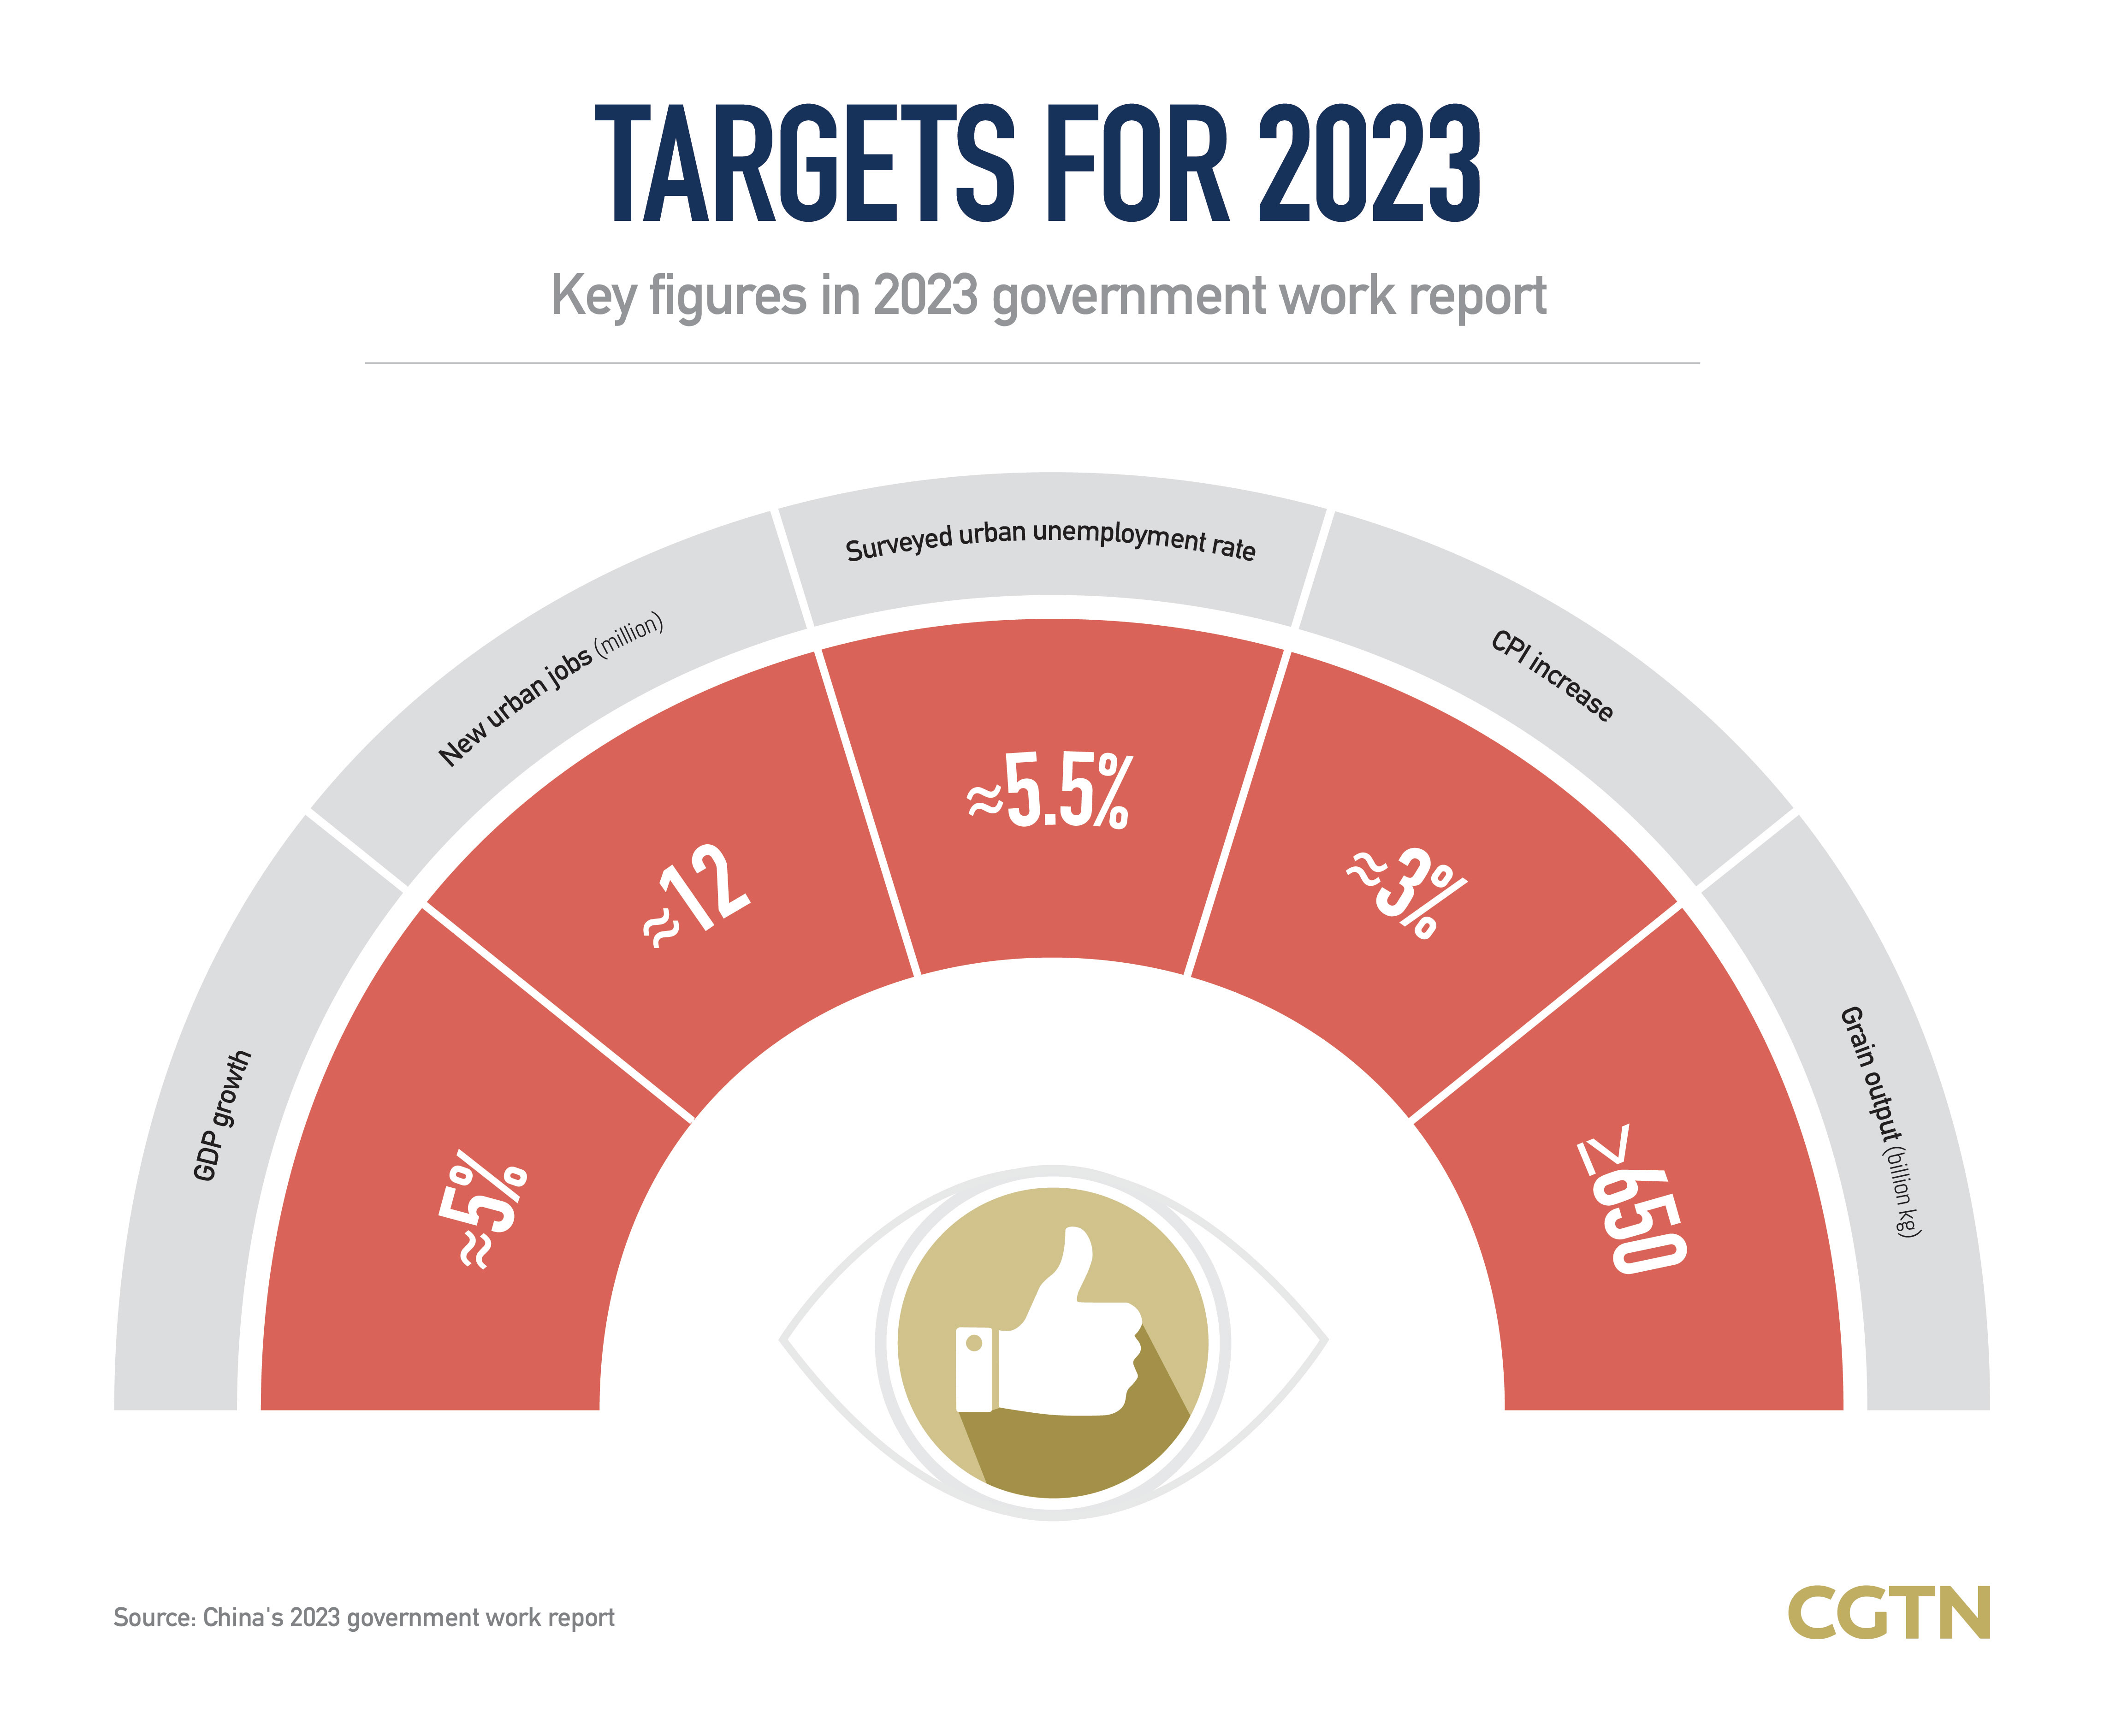 Graphics: Key figures in China's 2023 government work report